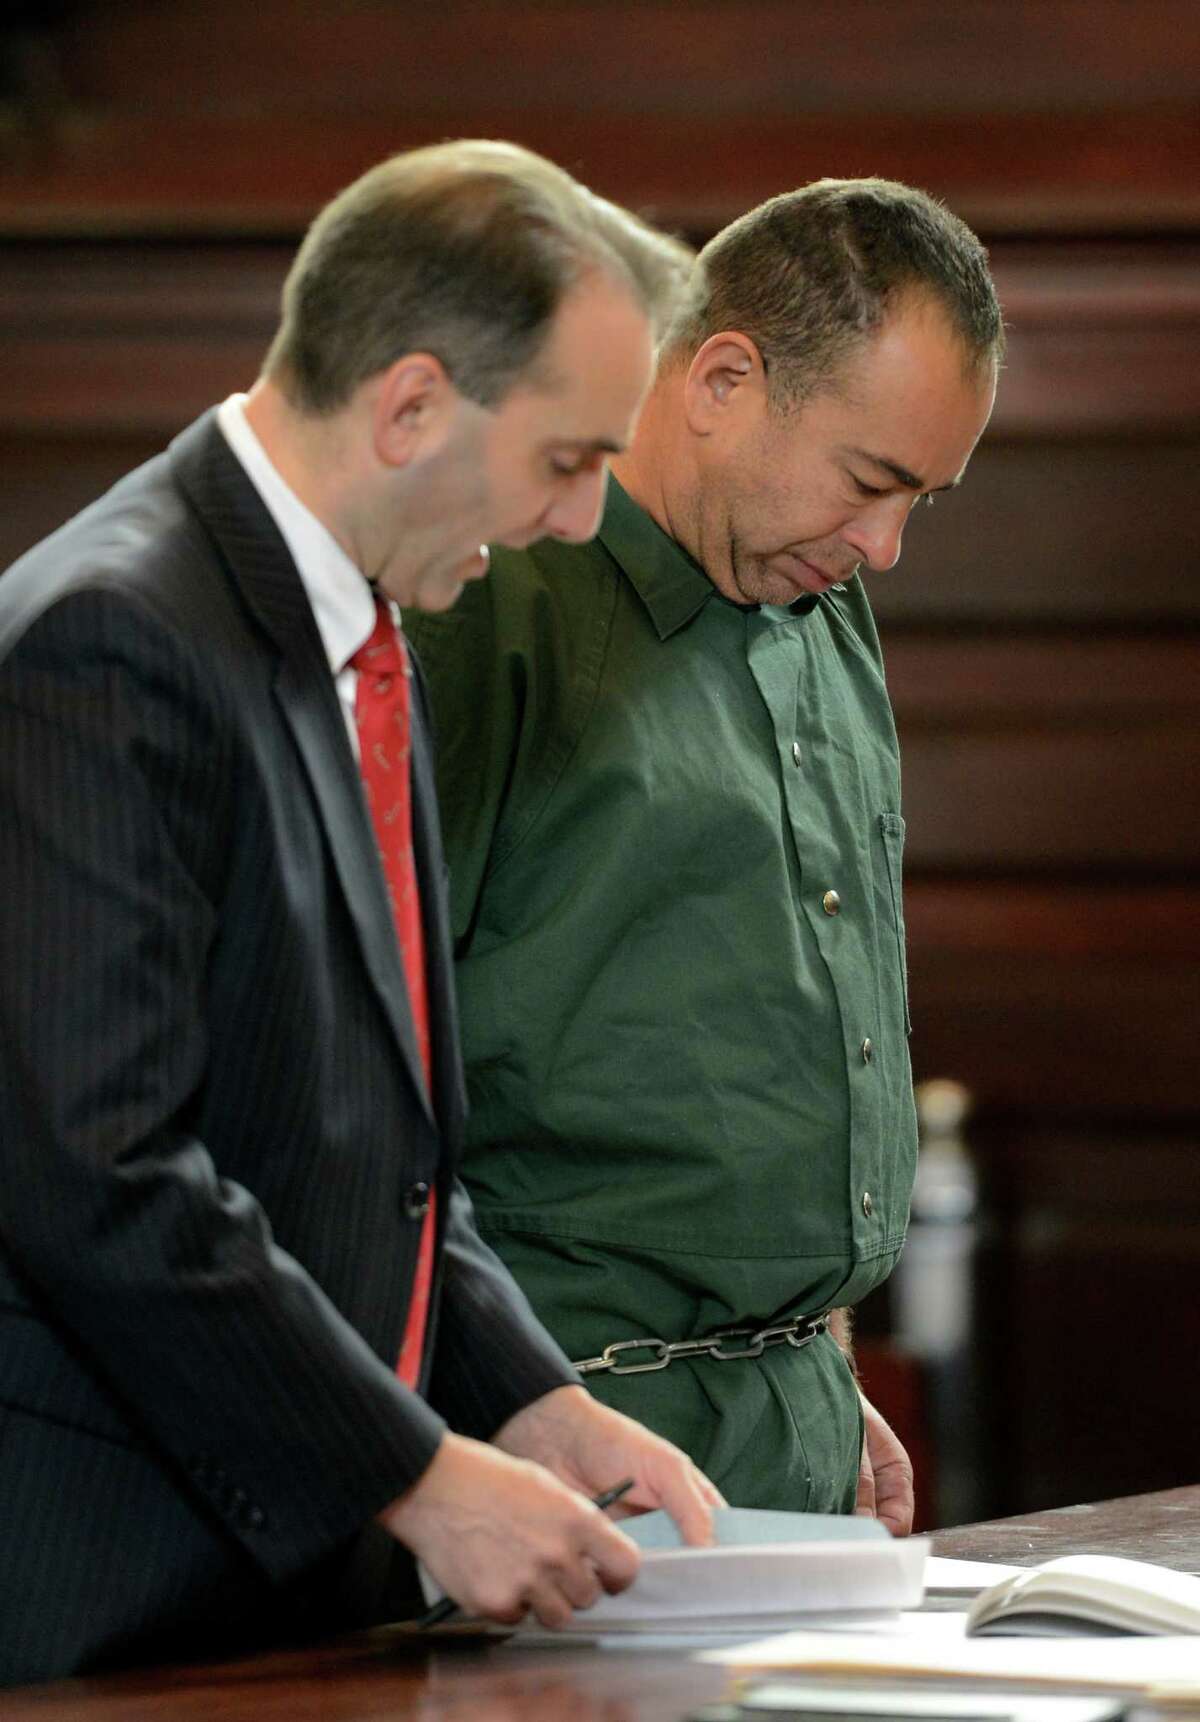 Dennis Bassat, right, former executive director of 820 River Street Inc. represented by Public Defender John Turi, was arraigned on grand larceny charges in front of Judge Andrew Ceresia at the Rensselaer County Courthouse in Troy, N.Y. Dec. 20, 2012. (Skip Dickstein/Times Union)